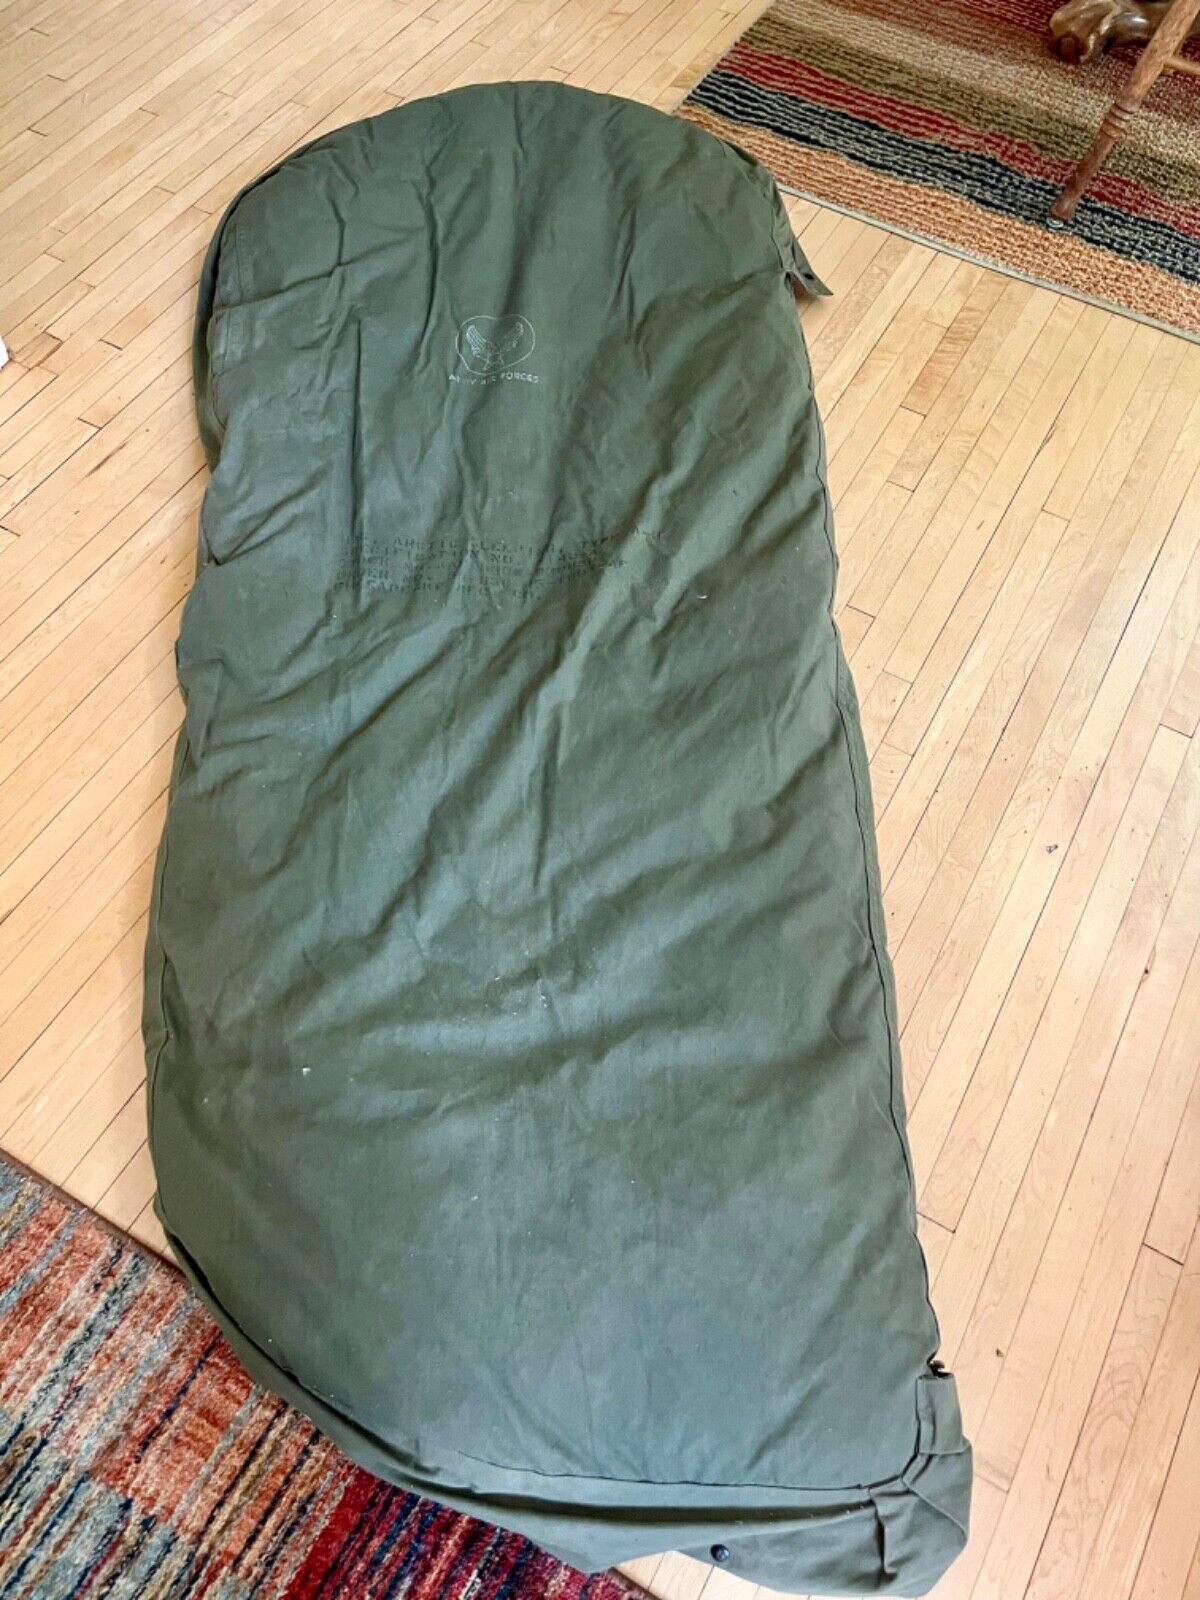 US Army Air Forces Arctic Down Sleeping bag with Arctic white /snow” camo cover